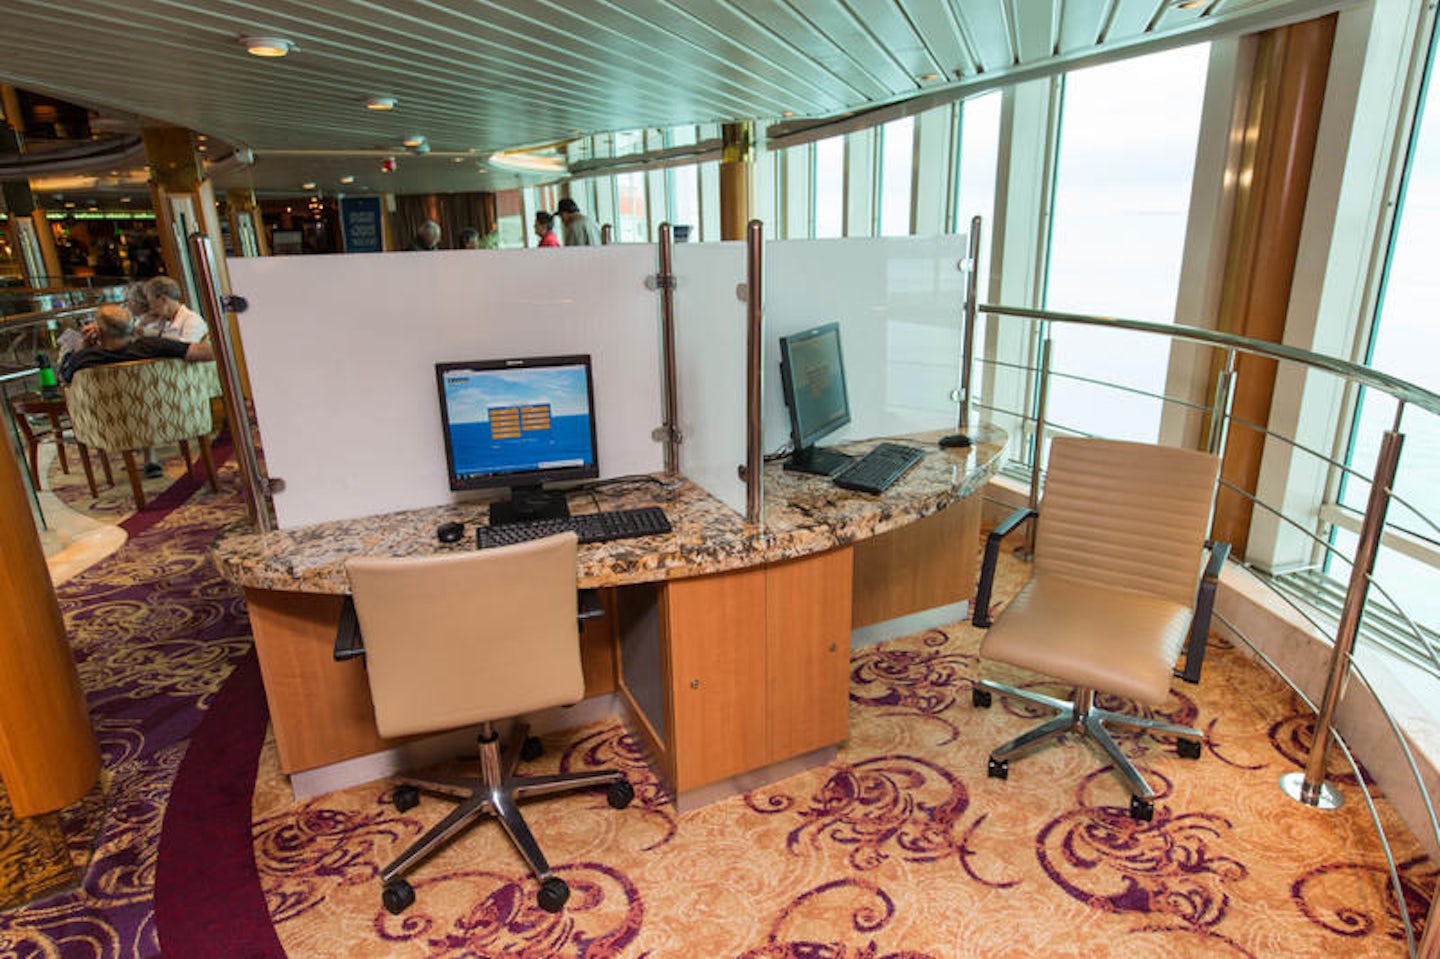 Royal Caribbean Online on Vision of the Seas